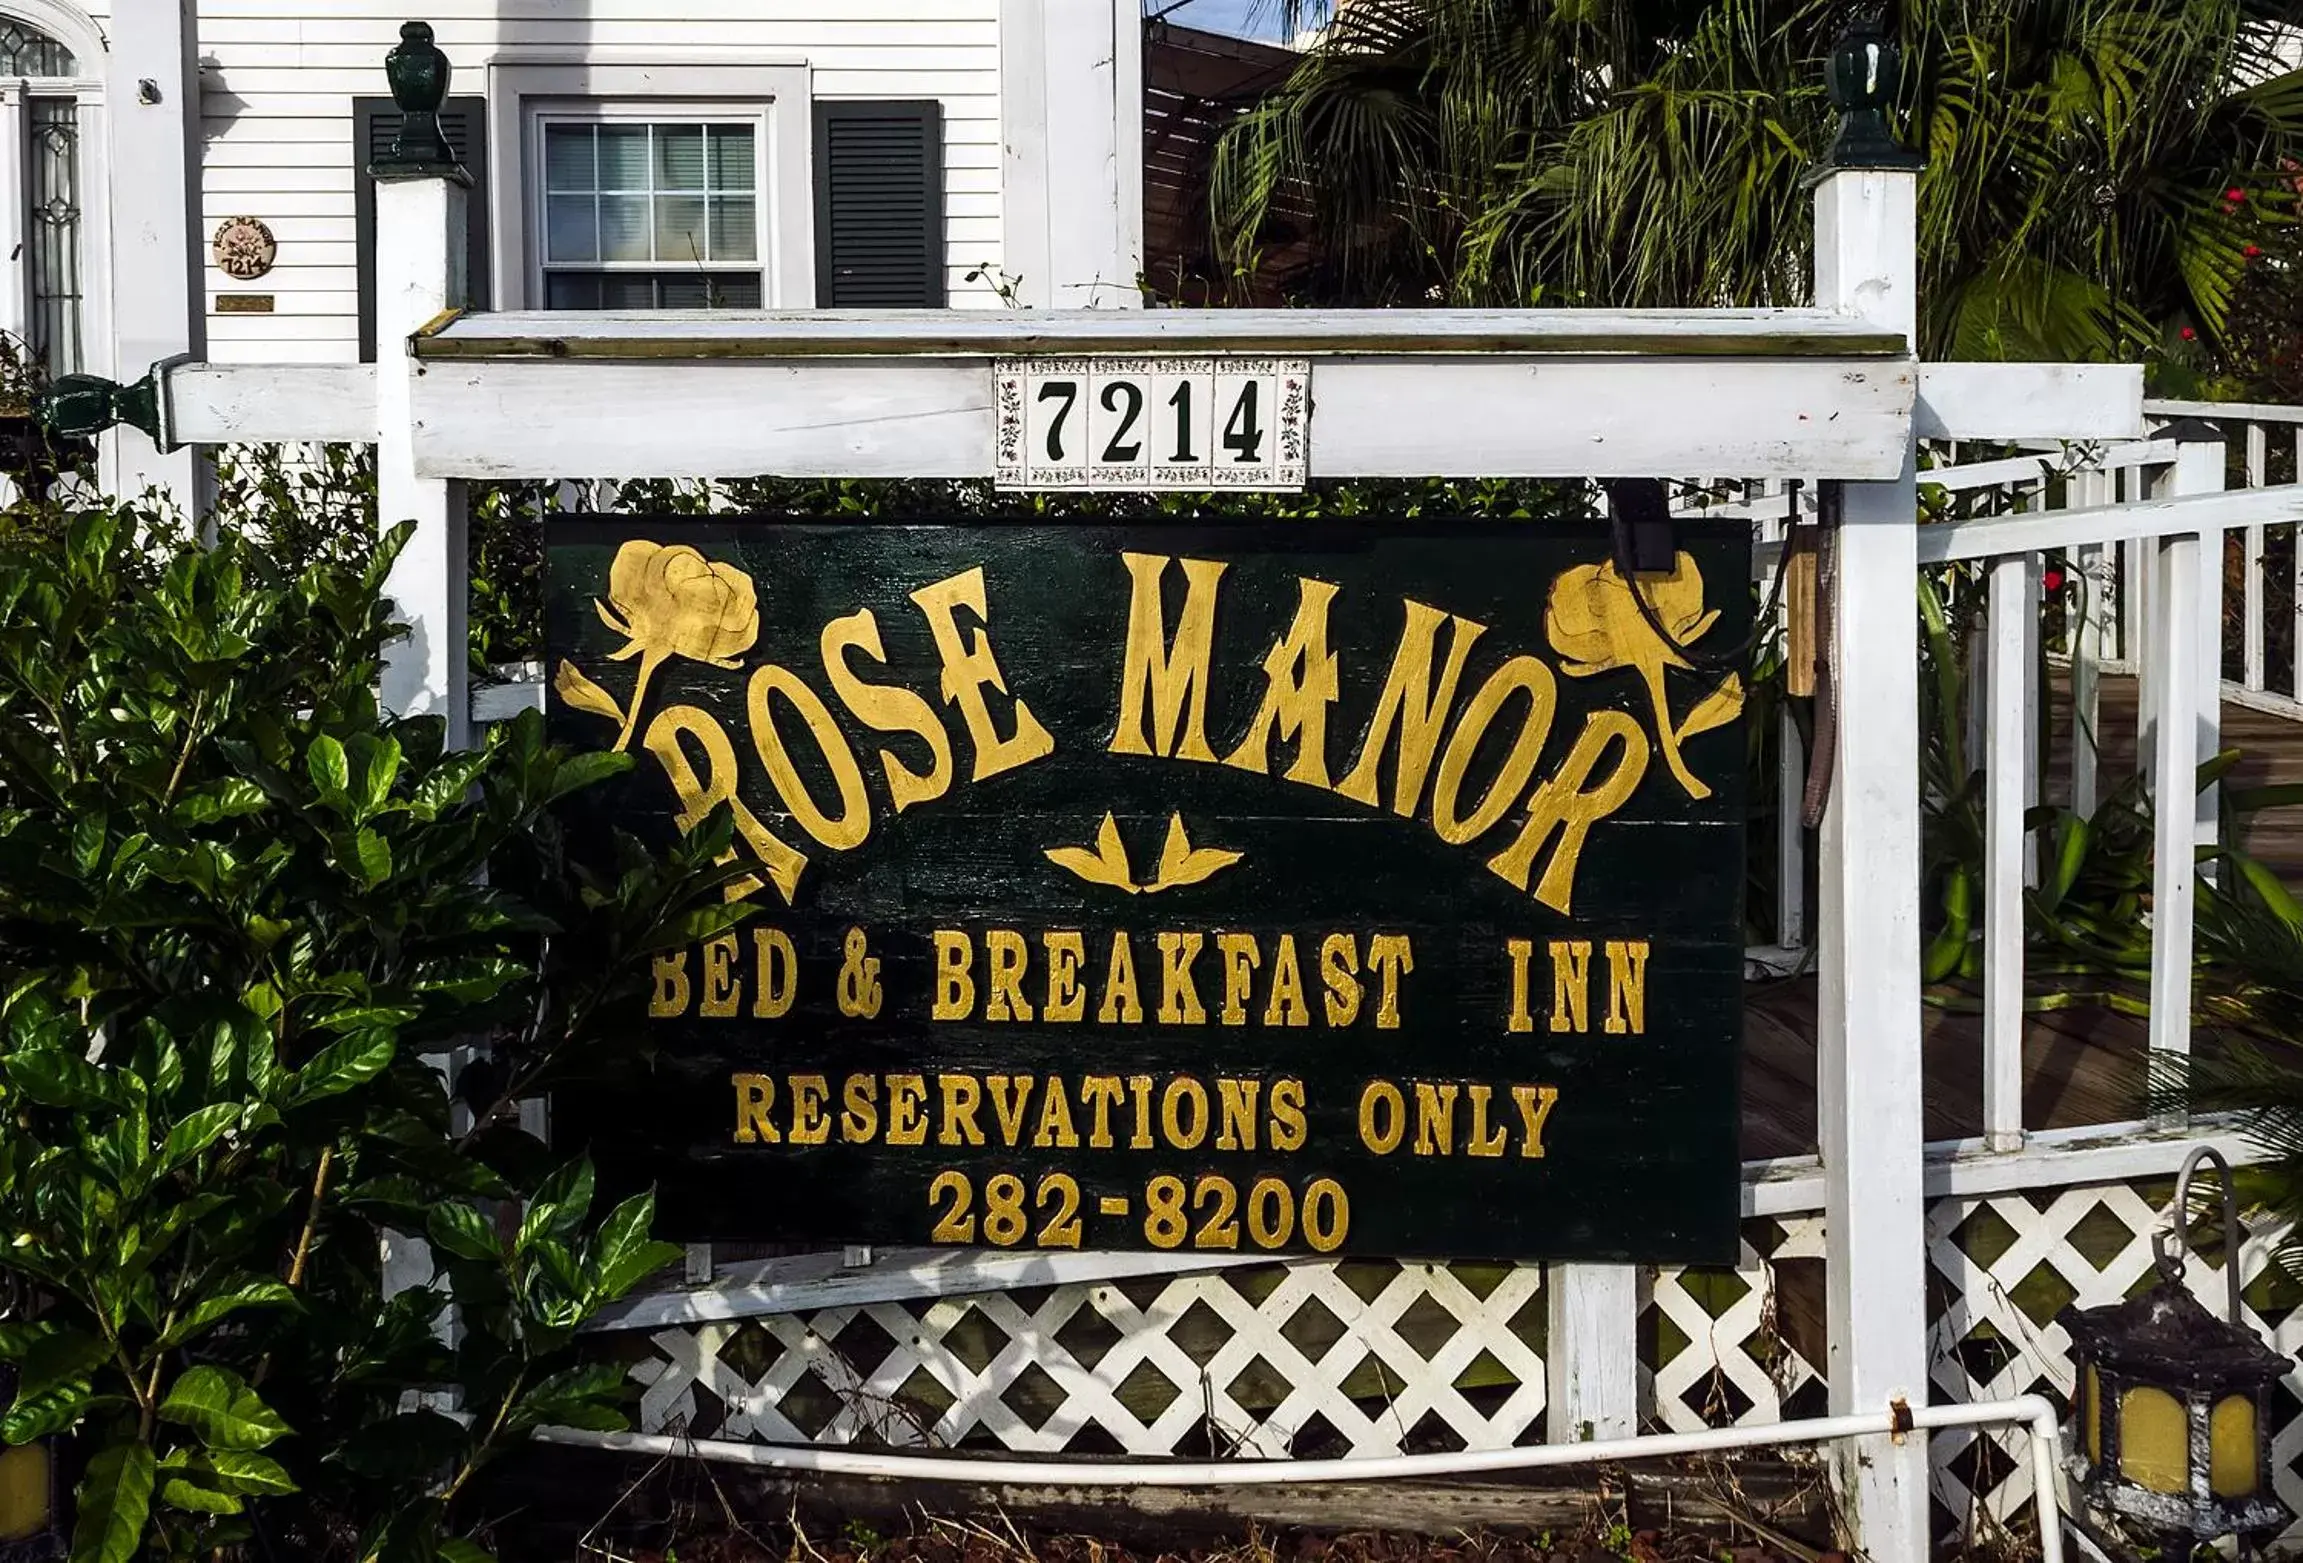 Property building, Property Logo/Sign in Rose Manor Bed & Breakfast